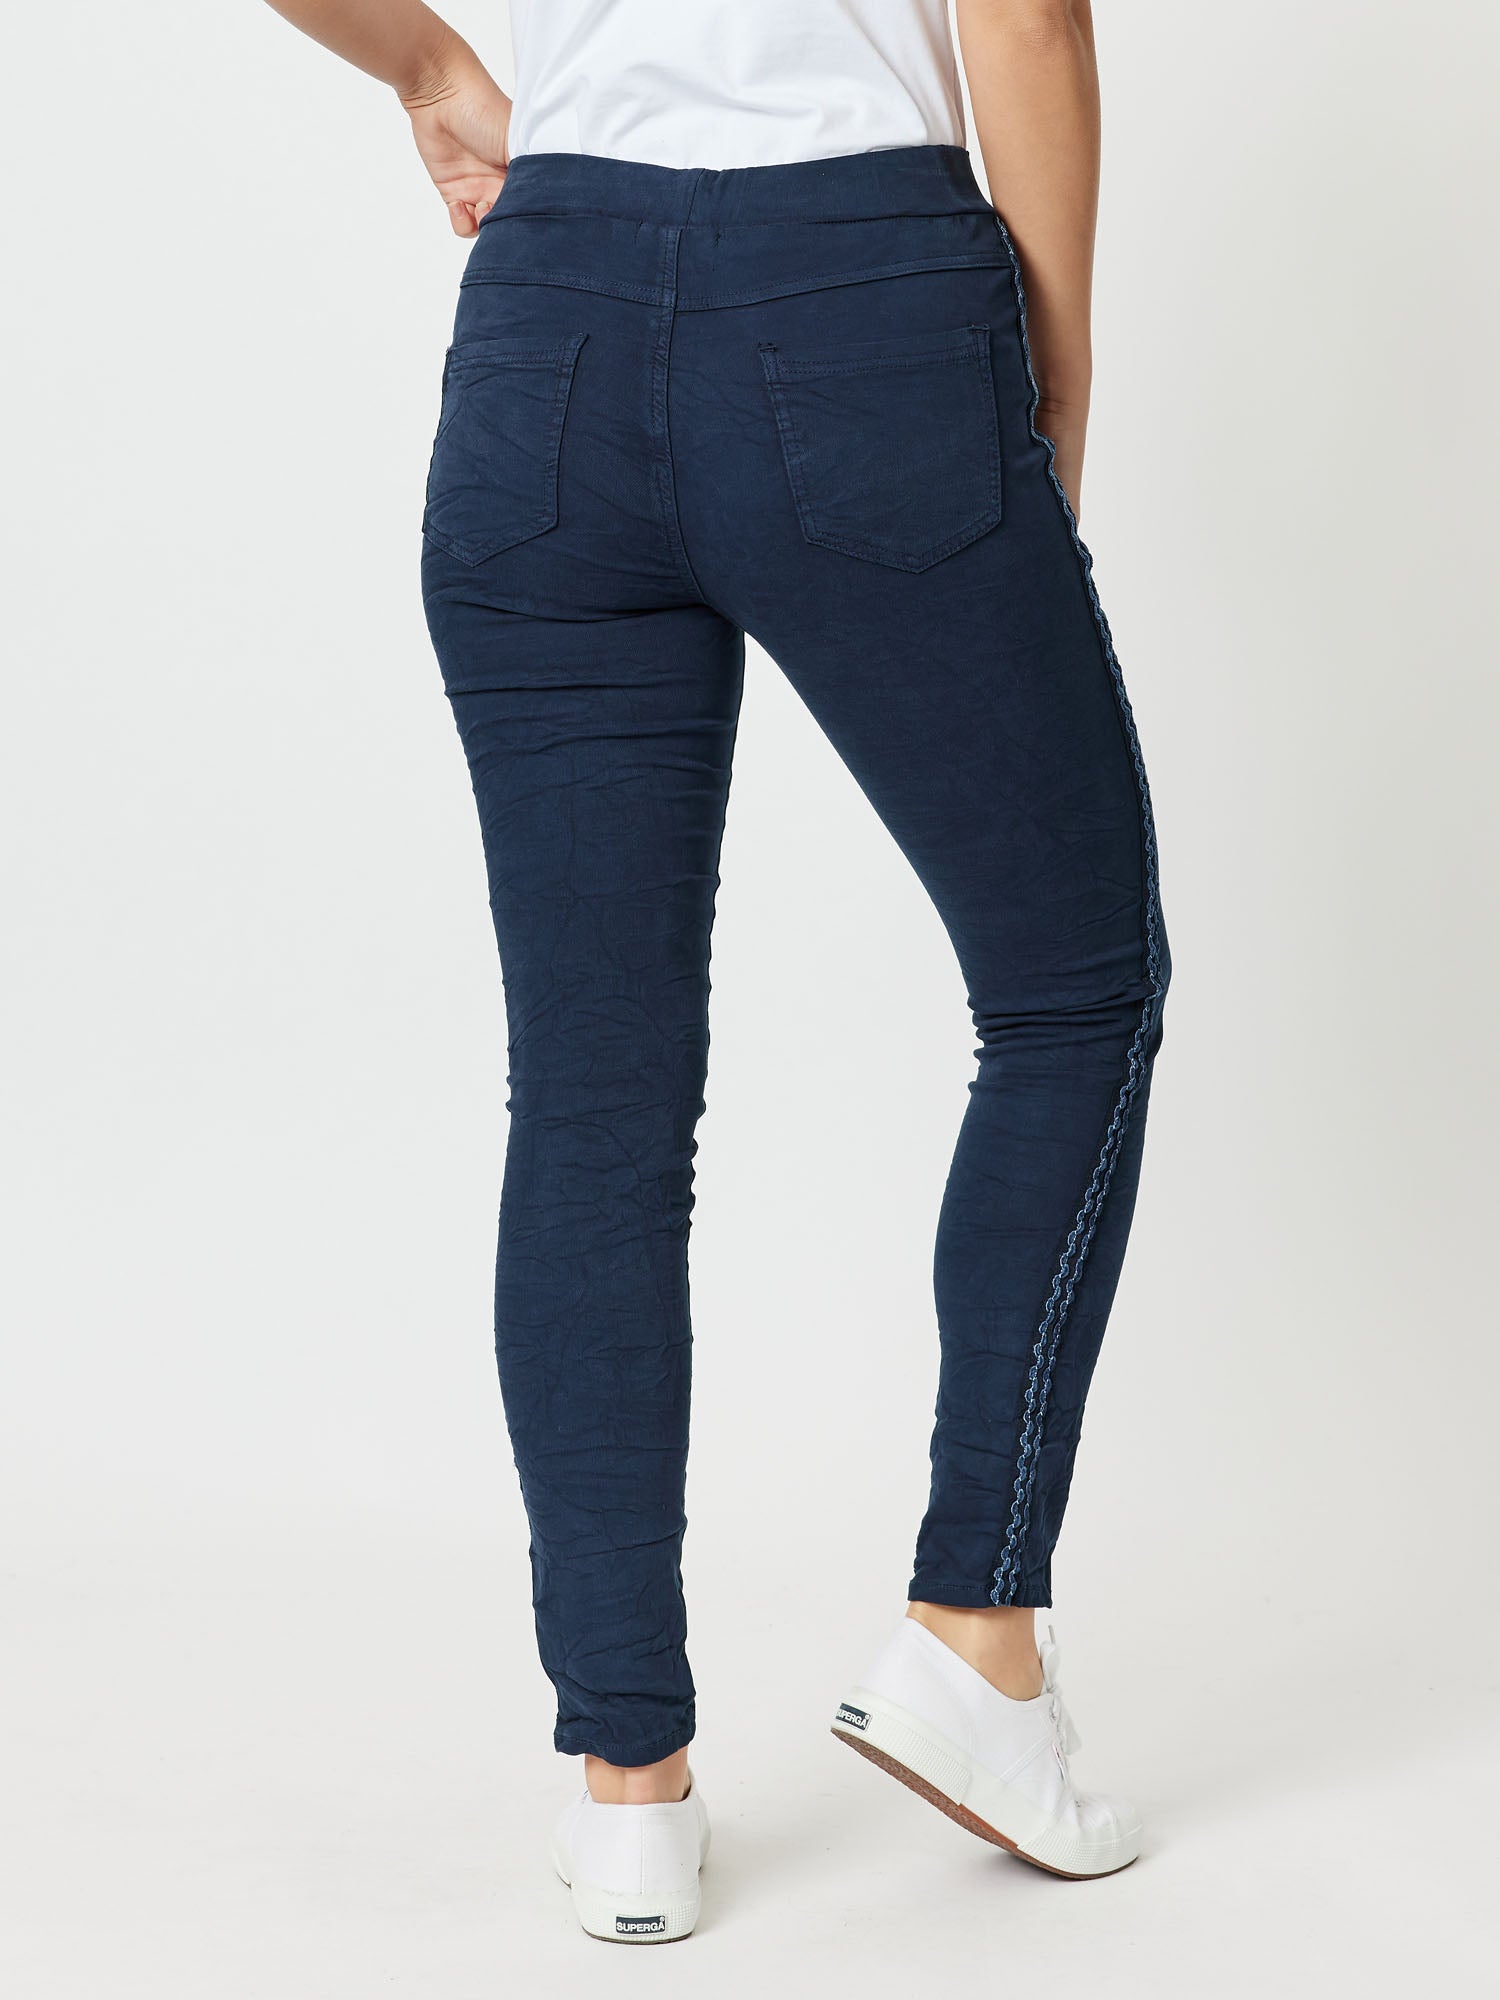 Crushed Embellished Pull-On Jeans - Navy